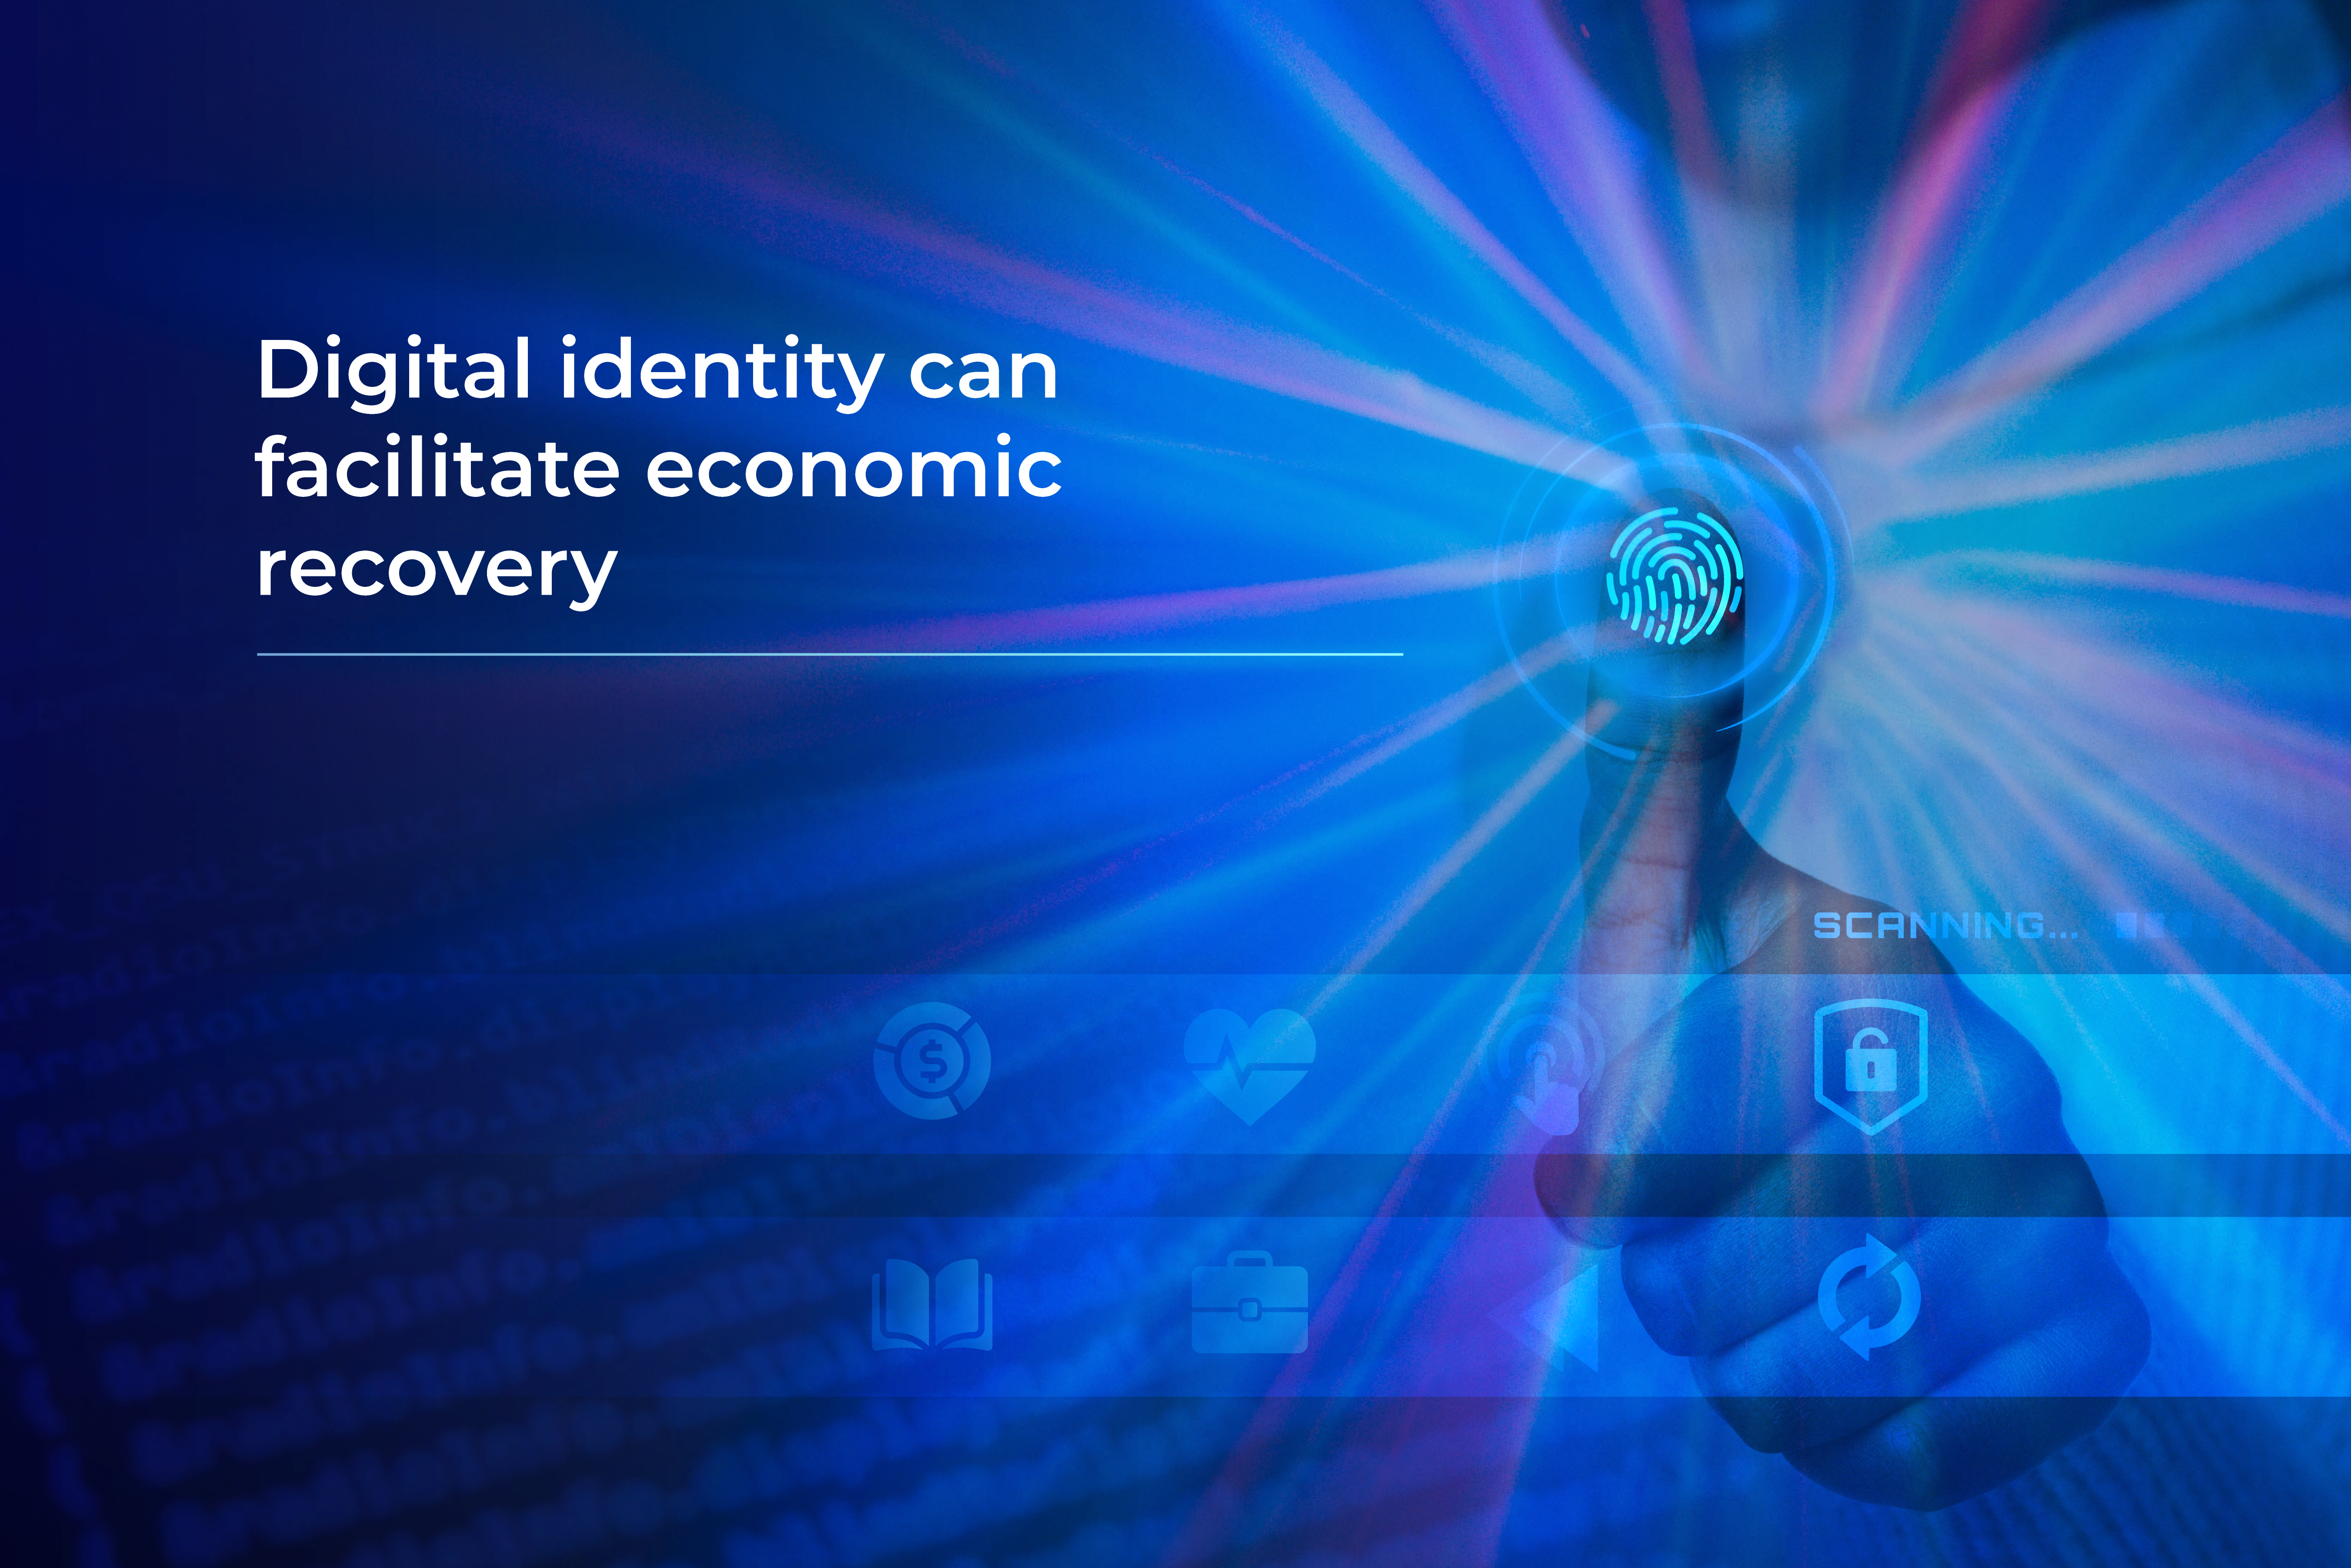 Digital identity and economic recovery